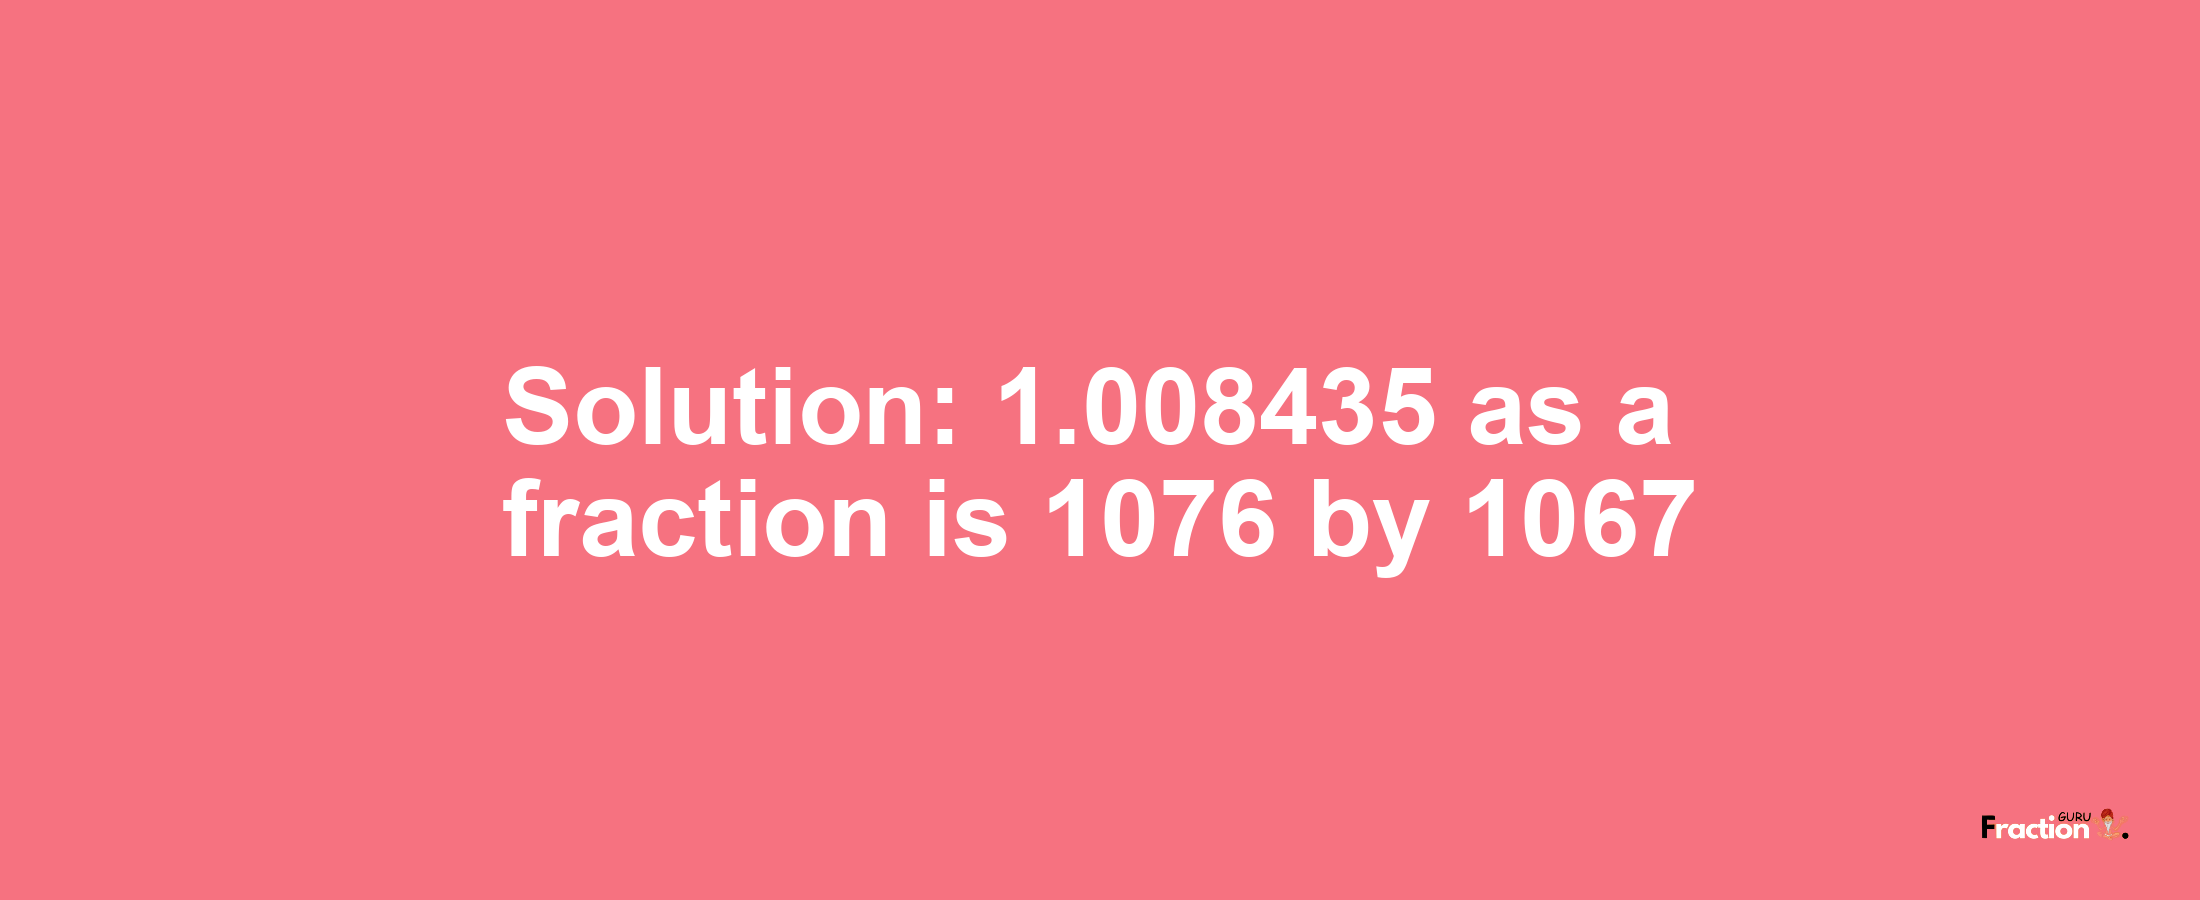 Solution:1.008435 as a fraction is 1076/1067